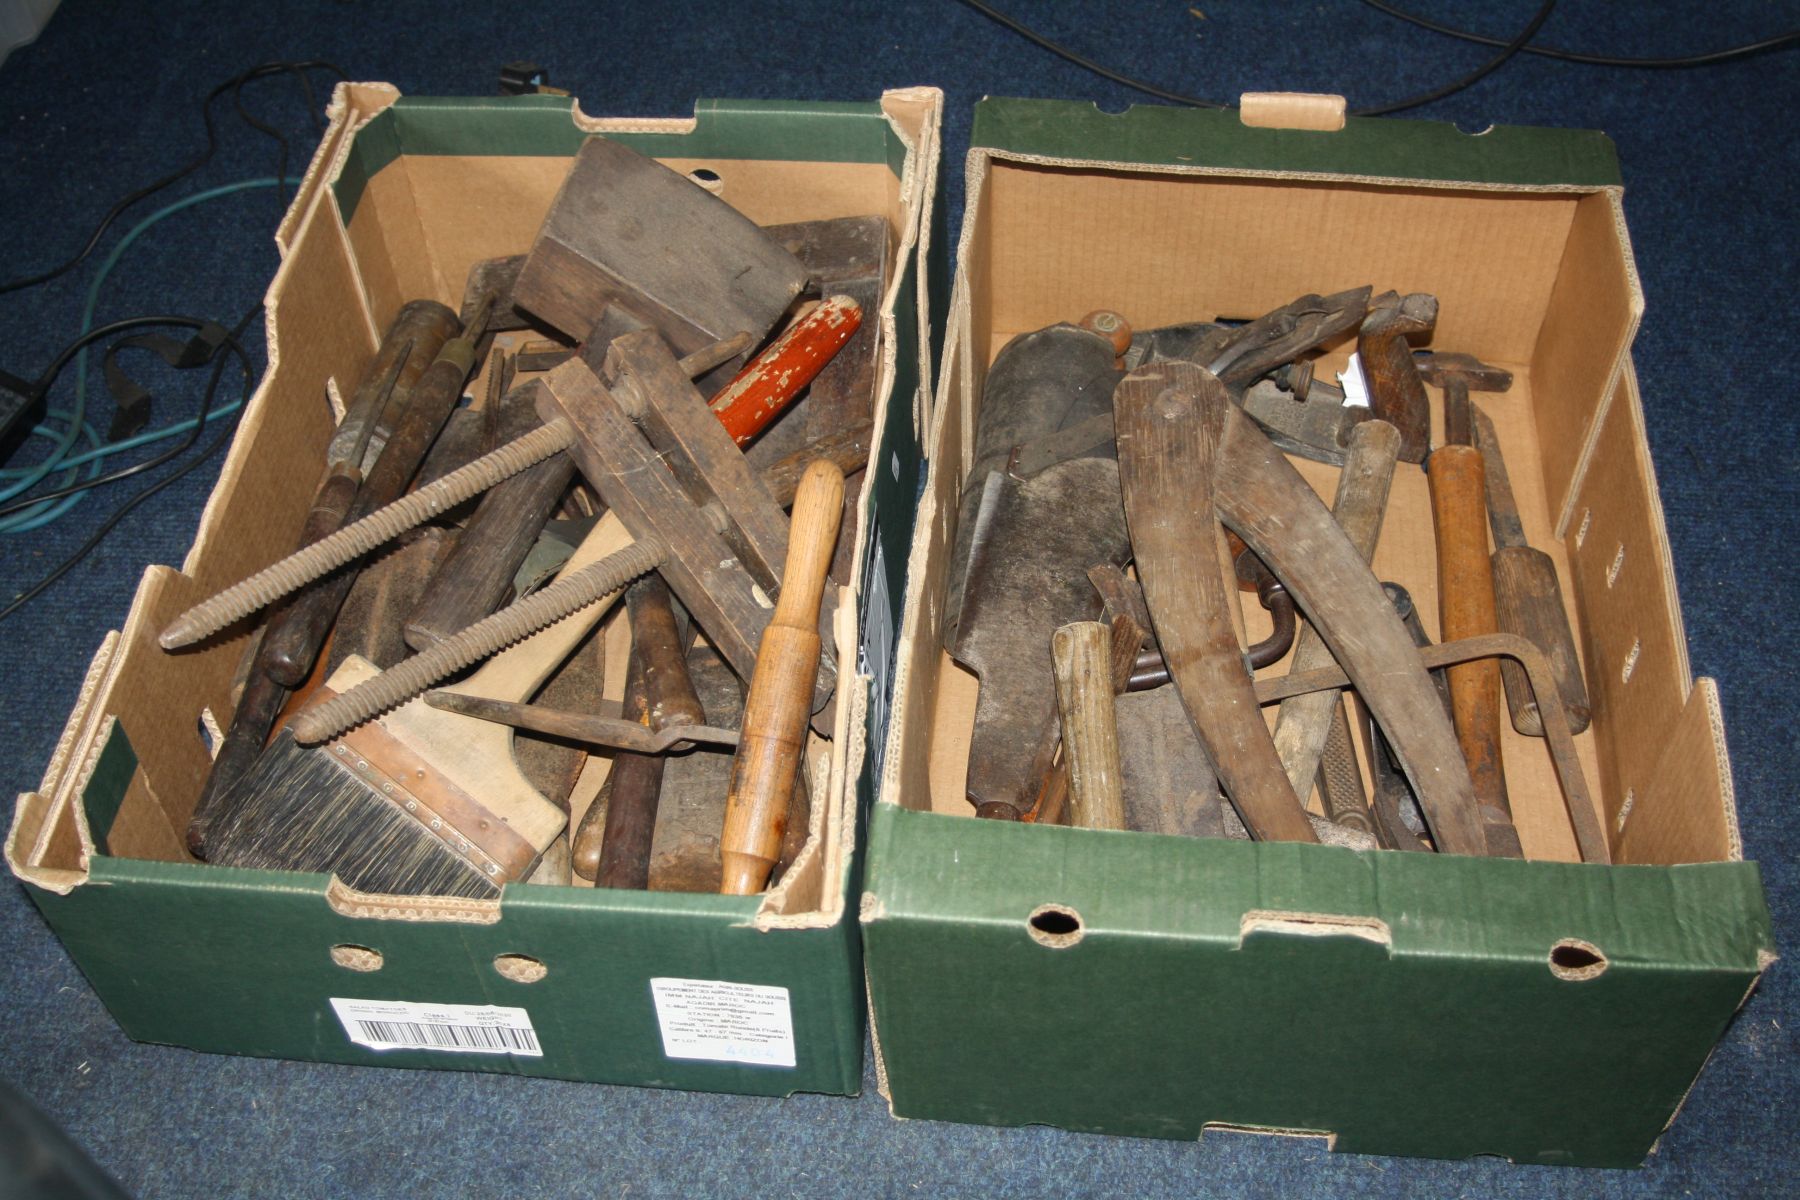 FIVE BOXES OF VARIOUS HAND TOOLS, to include planes, saws, hand sythes, files, chizels, hammers, - Image 3 of 14